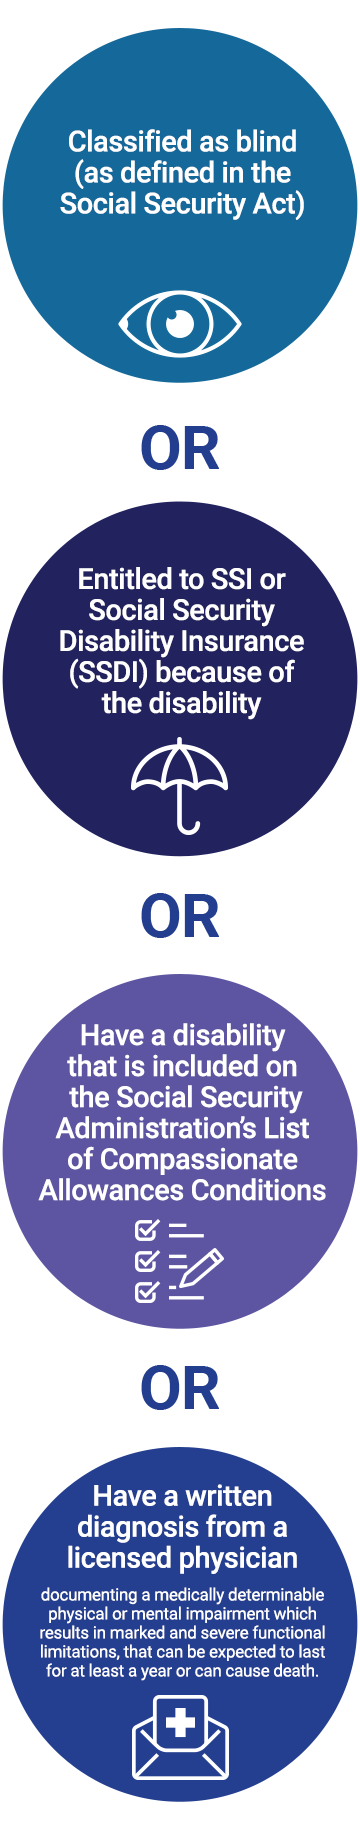 To be eligible, a beneficiary must have a disability that was present before age 26, with one of the following: Classified as blind (as defined in the Social Security Act), or Entitled to SSI or Social Security Disability Insurance (SSDI) because of the disability or Have a disability that is included on the Social Security Administration’s List of Compassionate Allowances Conditions or Have a written diagnosis from a licensed physician documenting a medically determinable physical or mental impairment which results in marked and severe functional limitations, that can be expected to last for at least a year or can cause death.